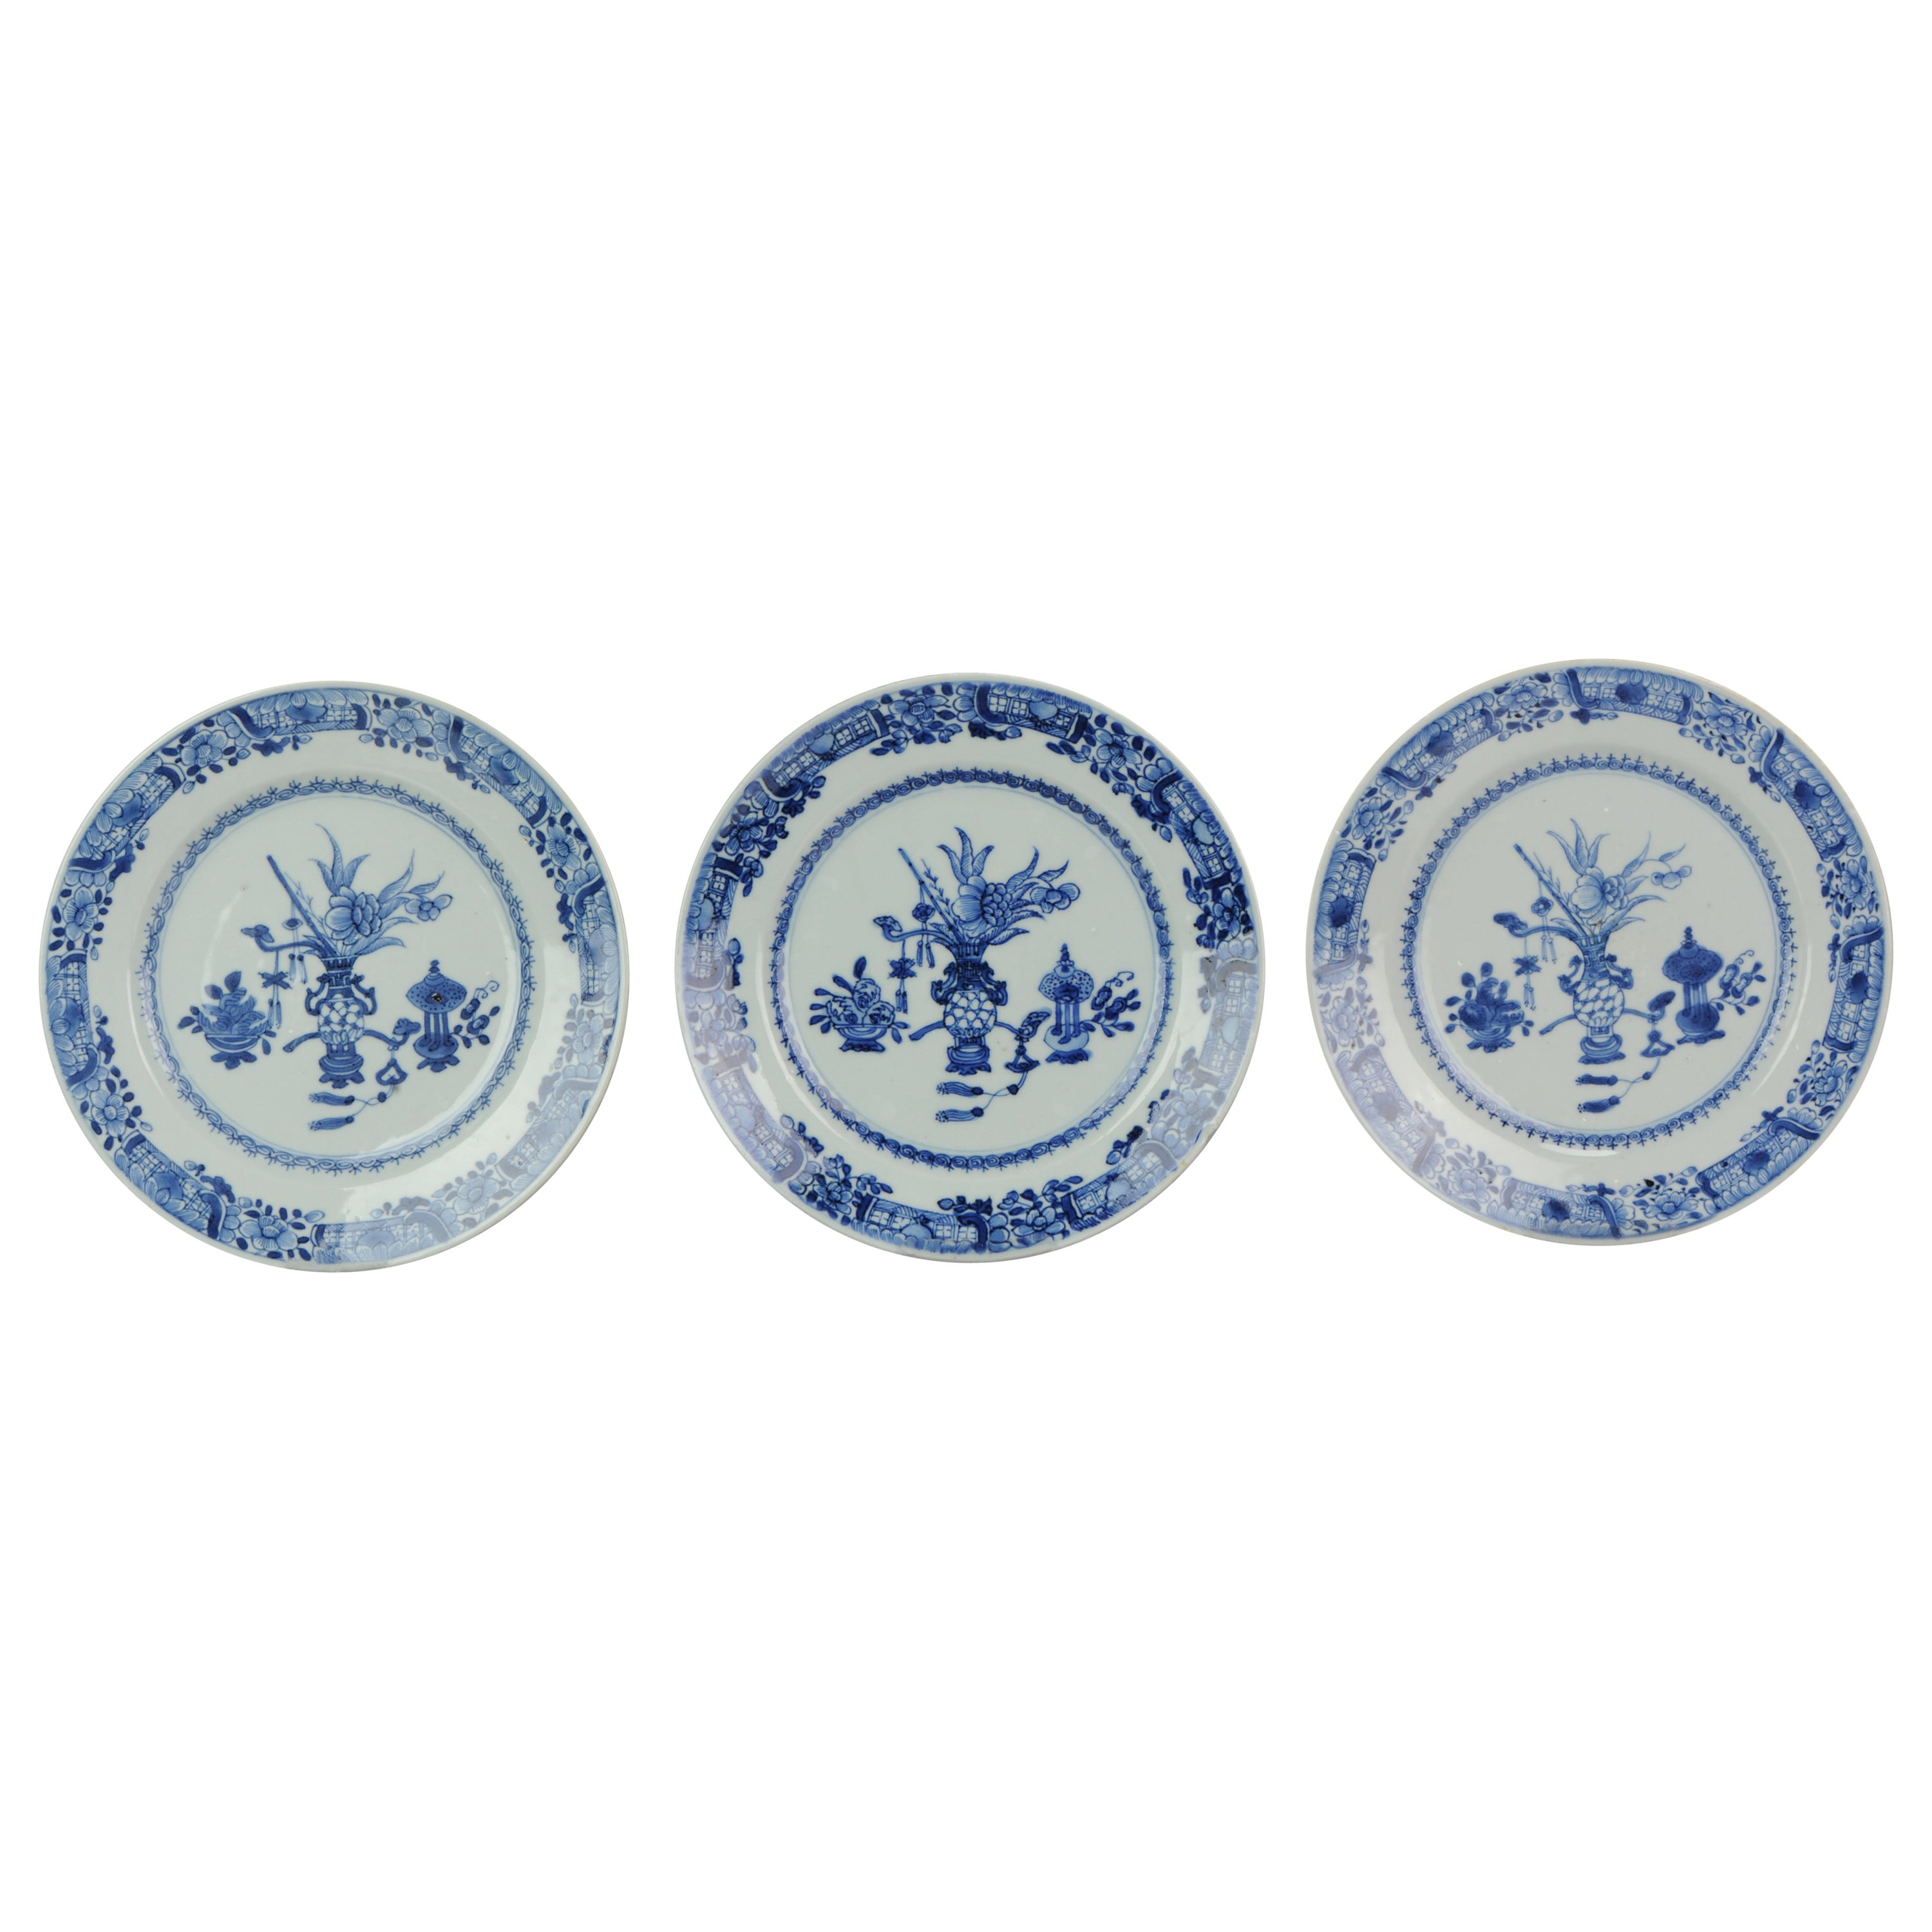 Set of 3 Antique Chinese Porcelain Blue White Dinner Plates, 18th Century For Sale